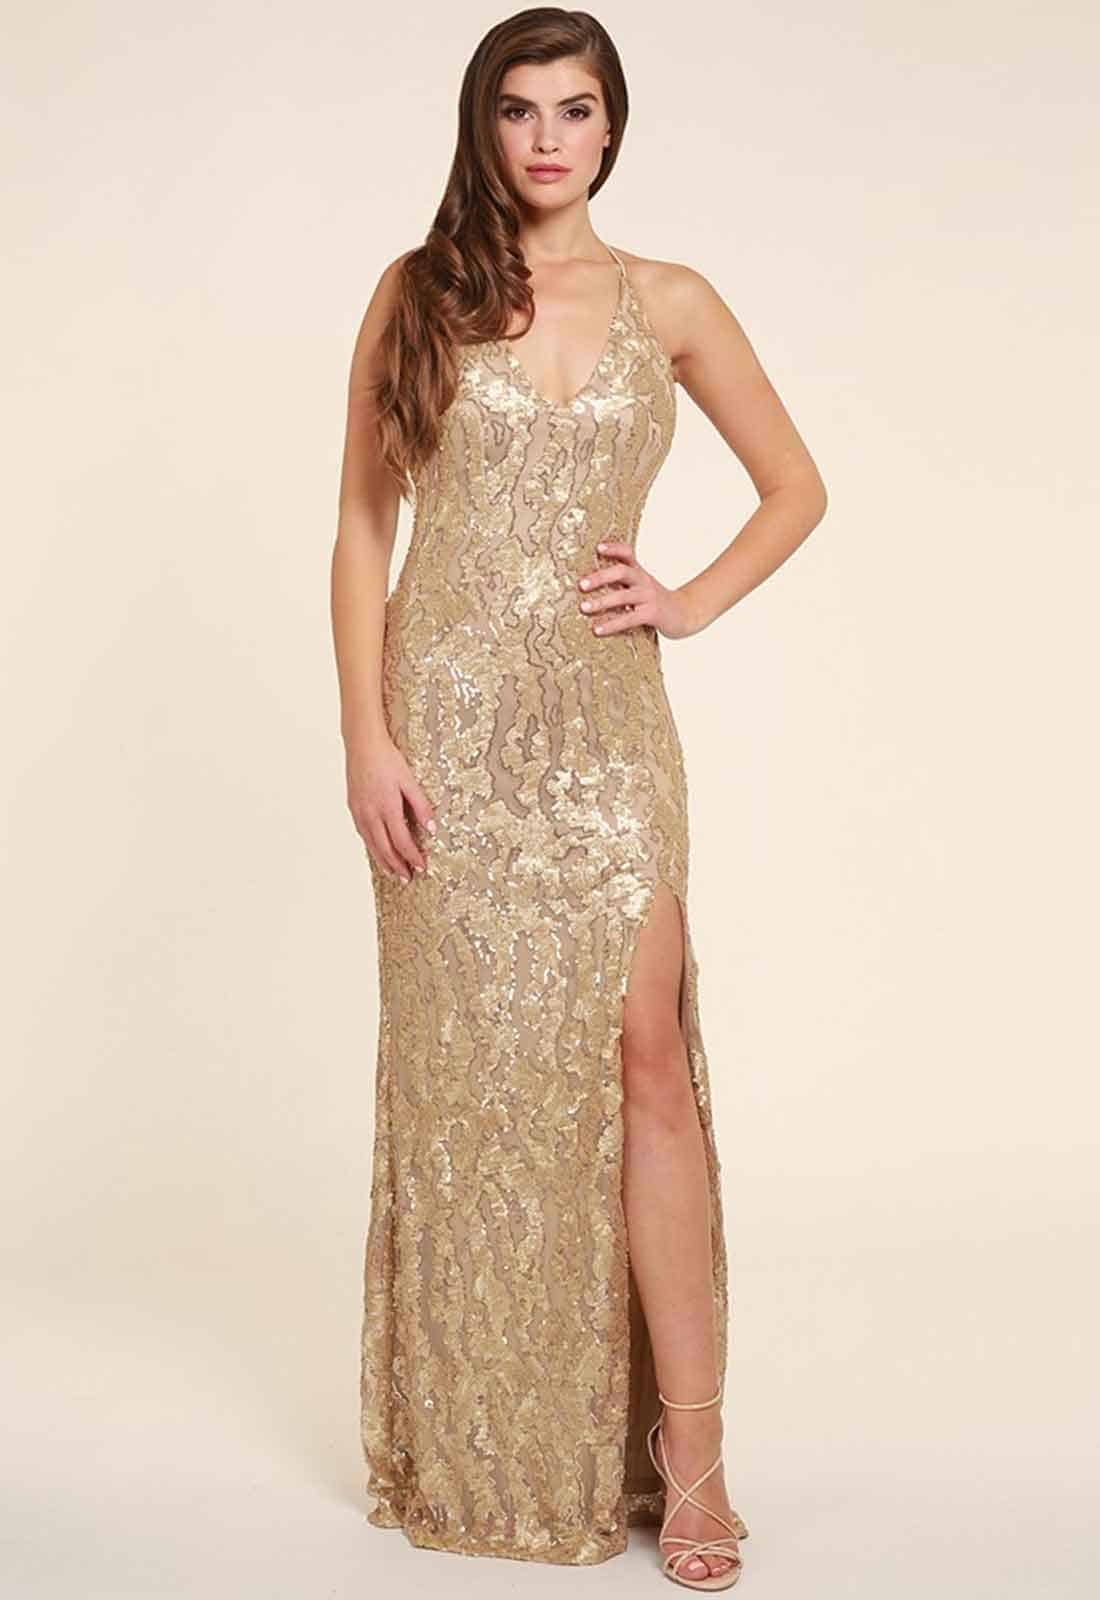 Honor Gold Gia Pleather Sequin Maxi in Gold-16517